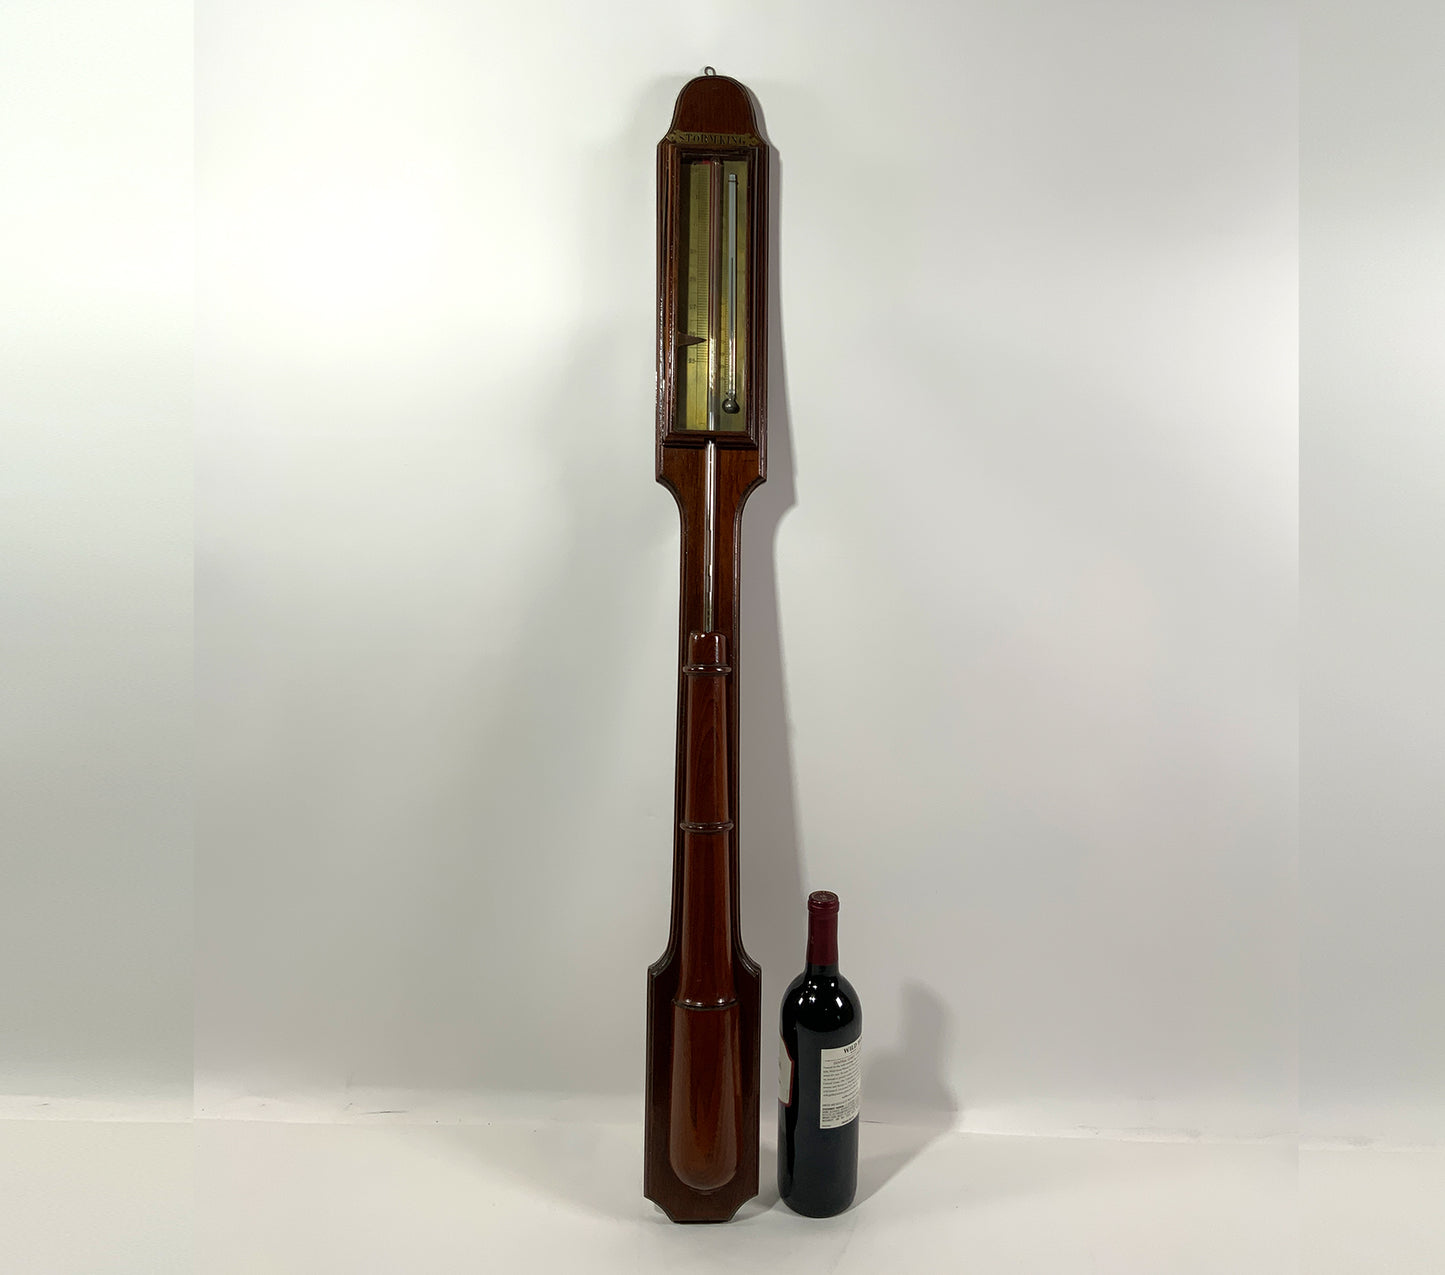 Barometer / Thermometer "Storm King" By E.C. Spooner - Lannan Gallery